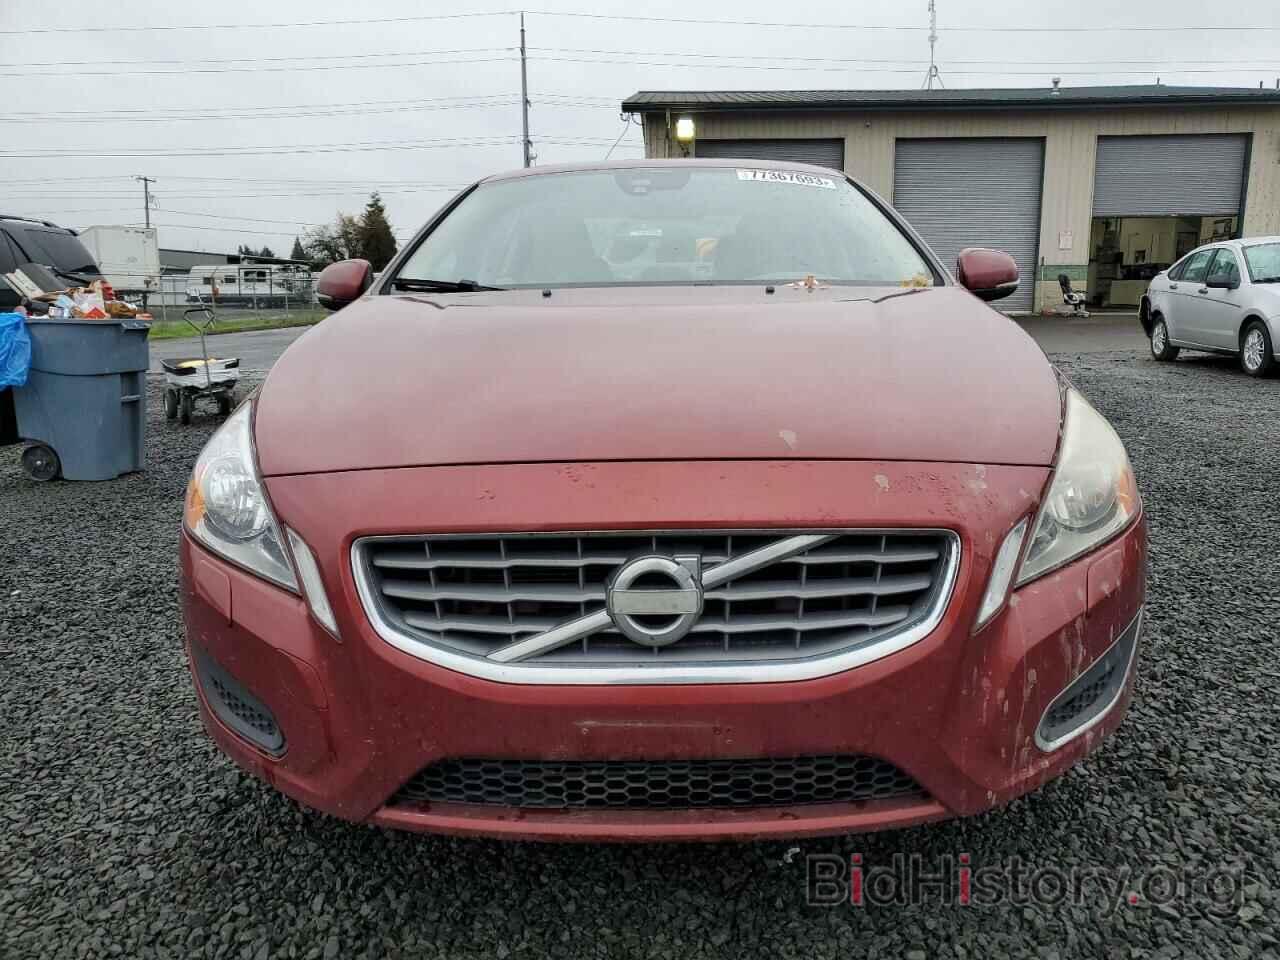 Report YV1612FS3D2187315 VOLVO S60 2013 BURGUNDY GAS - price and damage ...